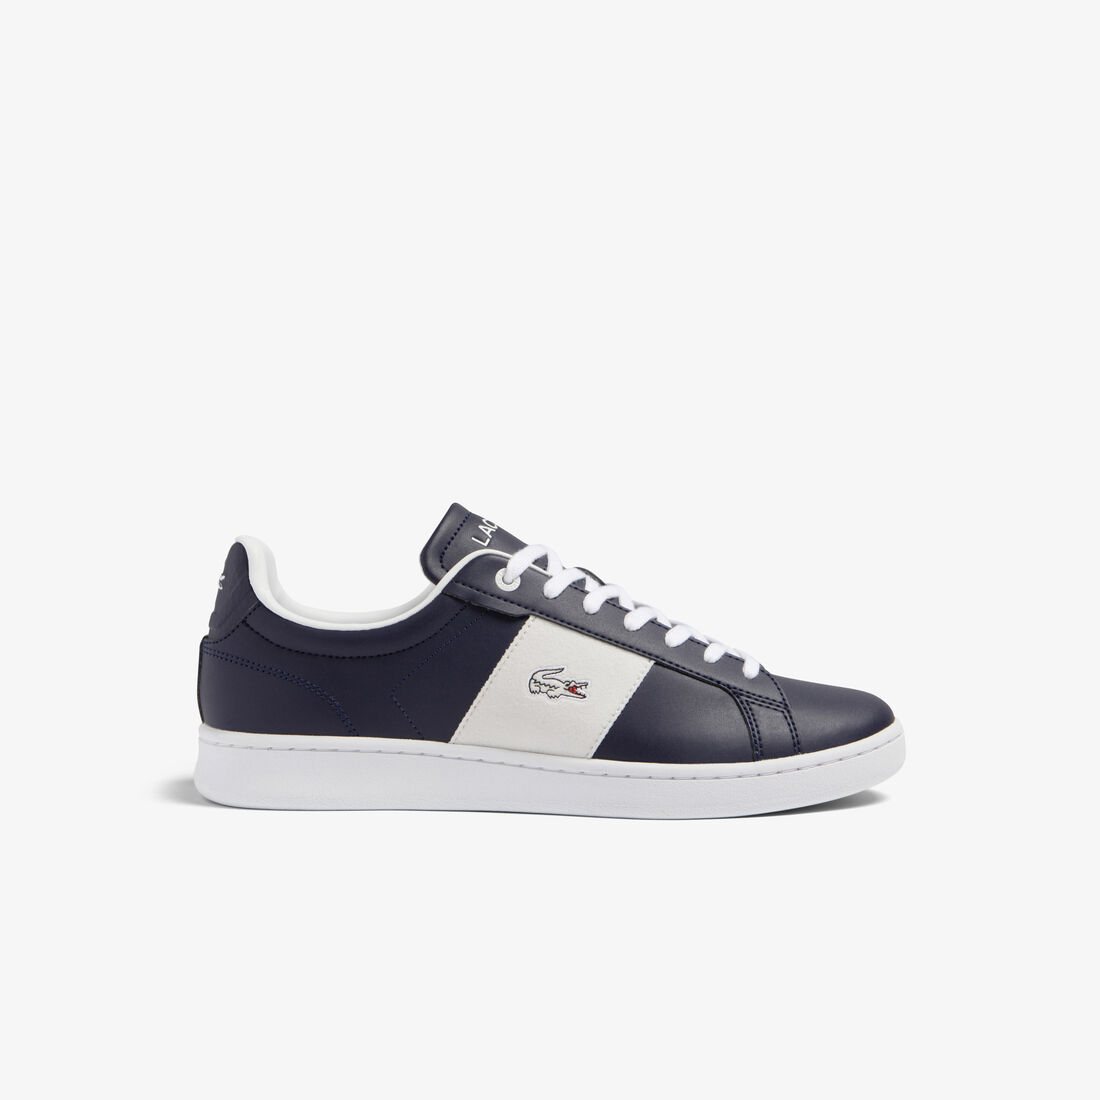 Men's Lacoste Carnaby Pro Leather Colour Contrast Trainers